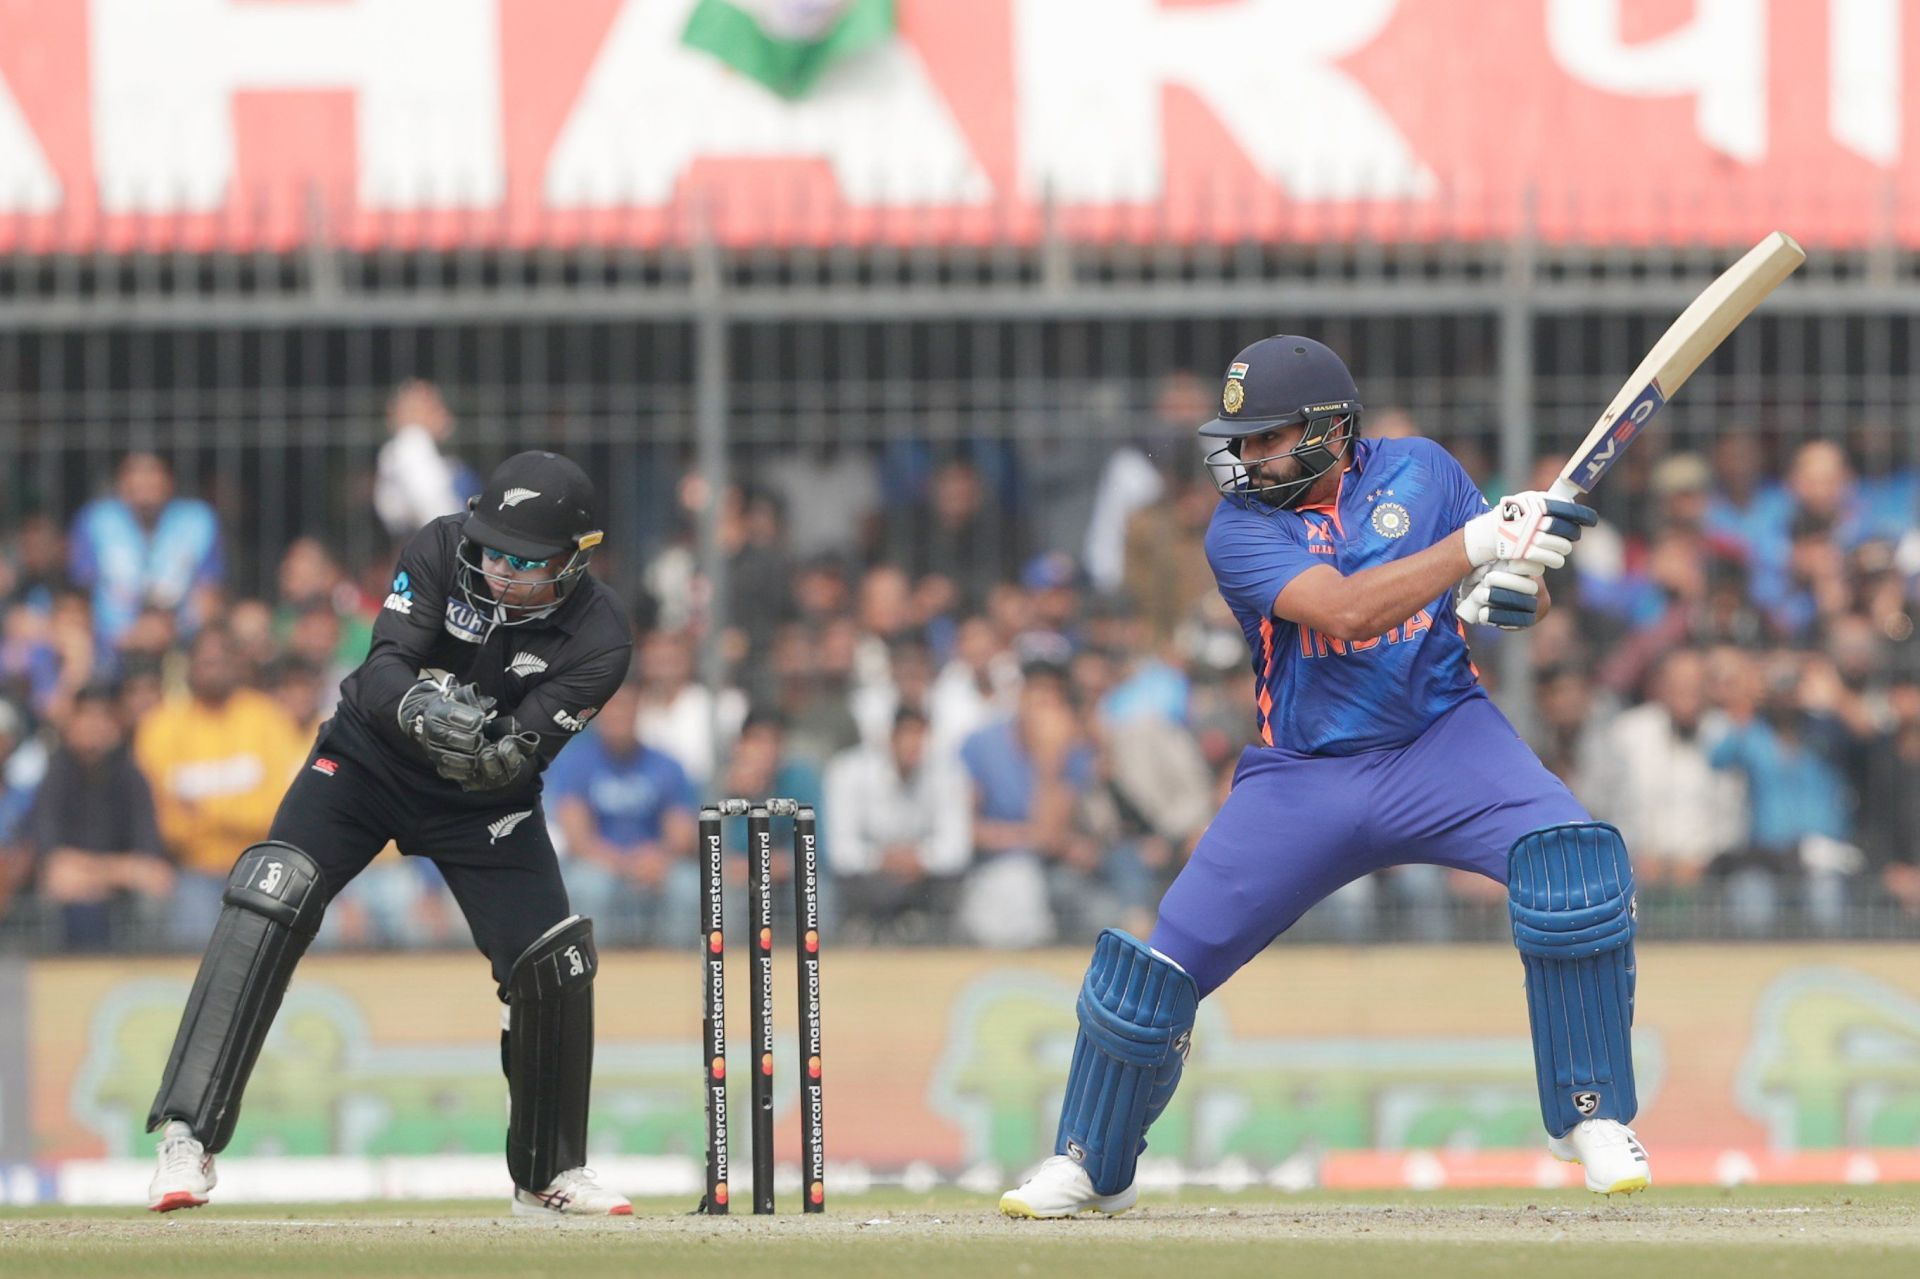 Rohit Sharma dominated the New Zealand bowling attack in the first half of the Indian innings 